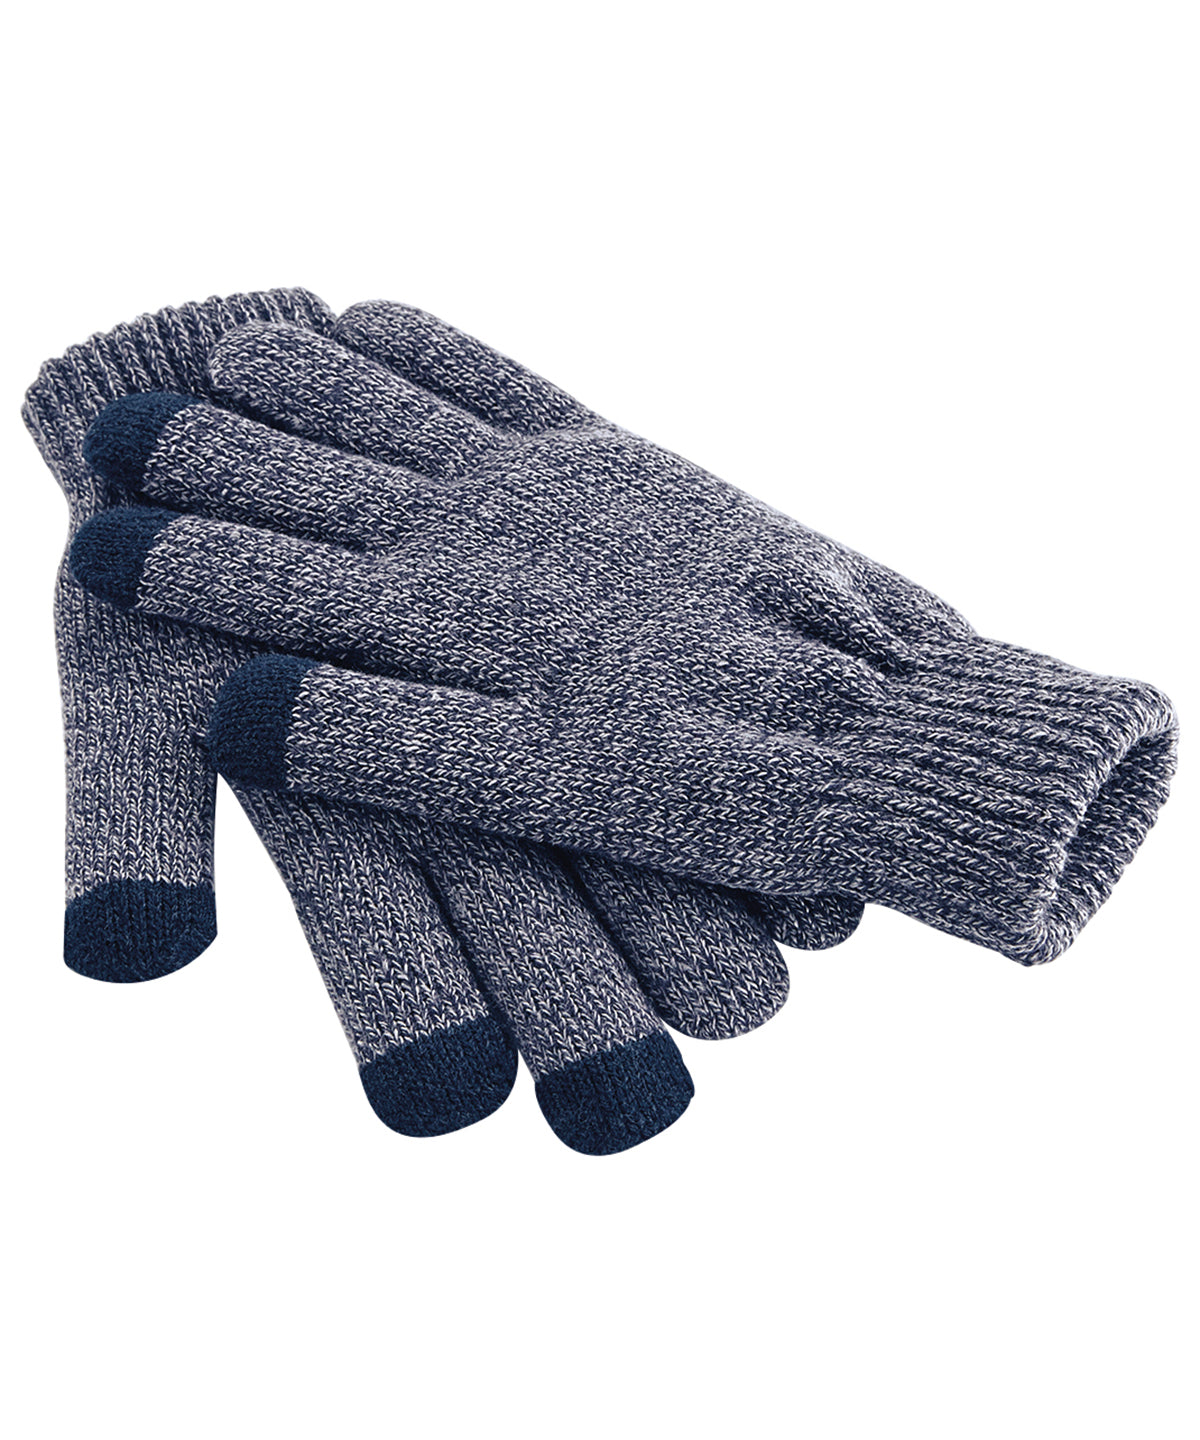 Personalised Gloves - Heather Grey Beechfield Touchscreen smart gloves